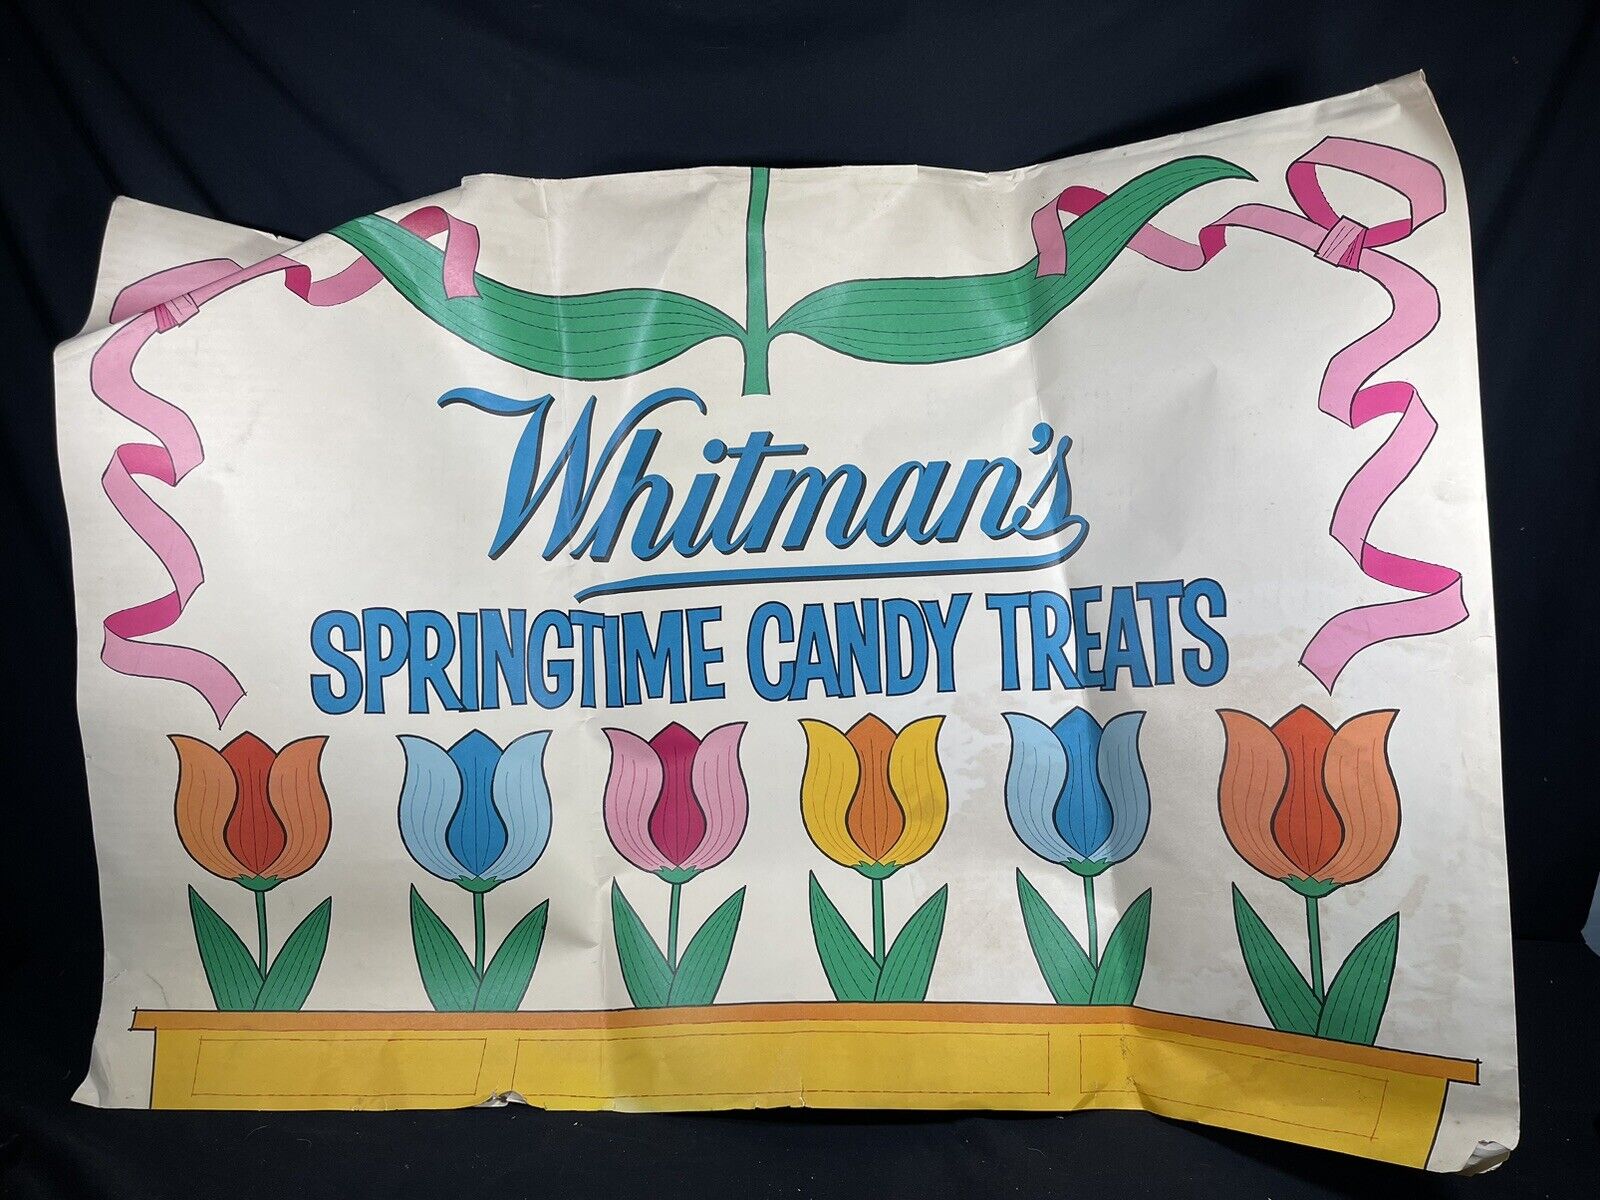 Vintage Whitmans Springtime Candy Treats Paper Advertising Store Display Poster